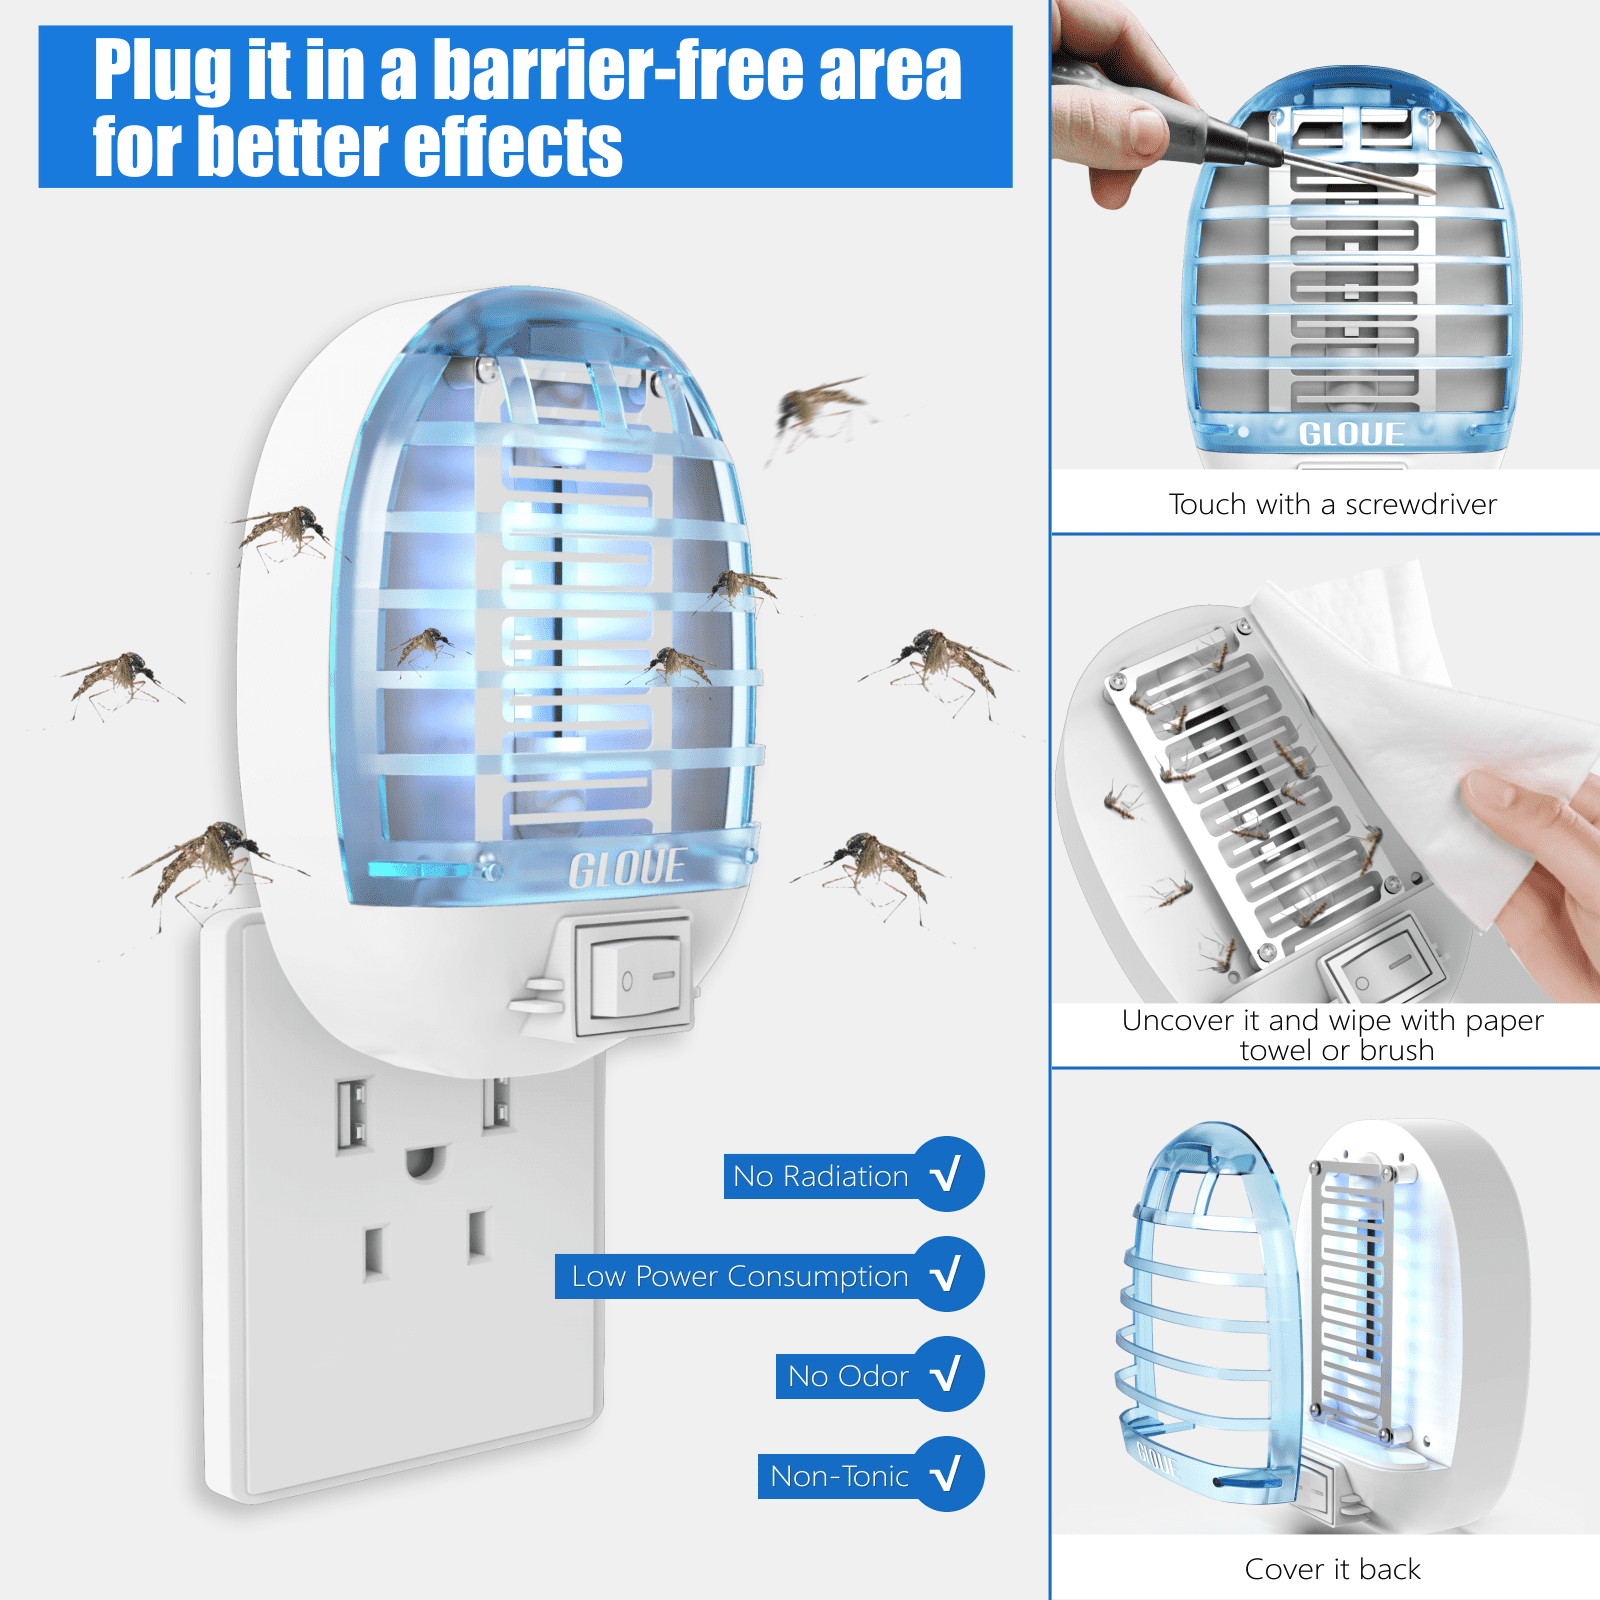 Insects Trap DH-MW10A Intelabe Fruit Fly Trap Indoor Mosquito Trap Gnat Trap  Bug Zapper with Light Control Timer Setting Refillable Glue Boards –  Jacksons Empire